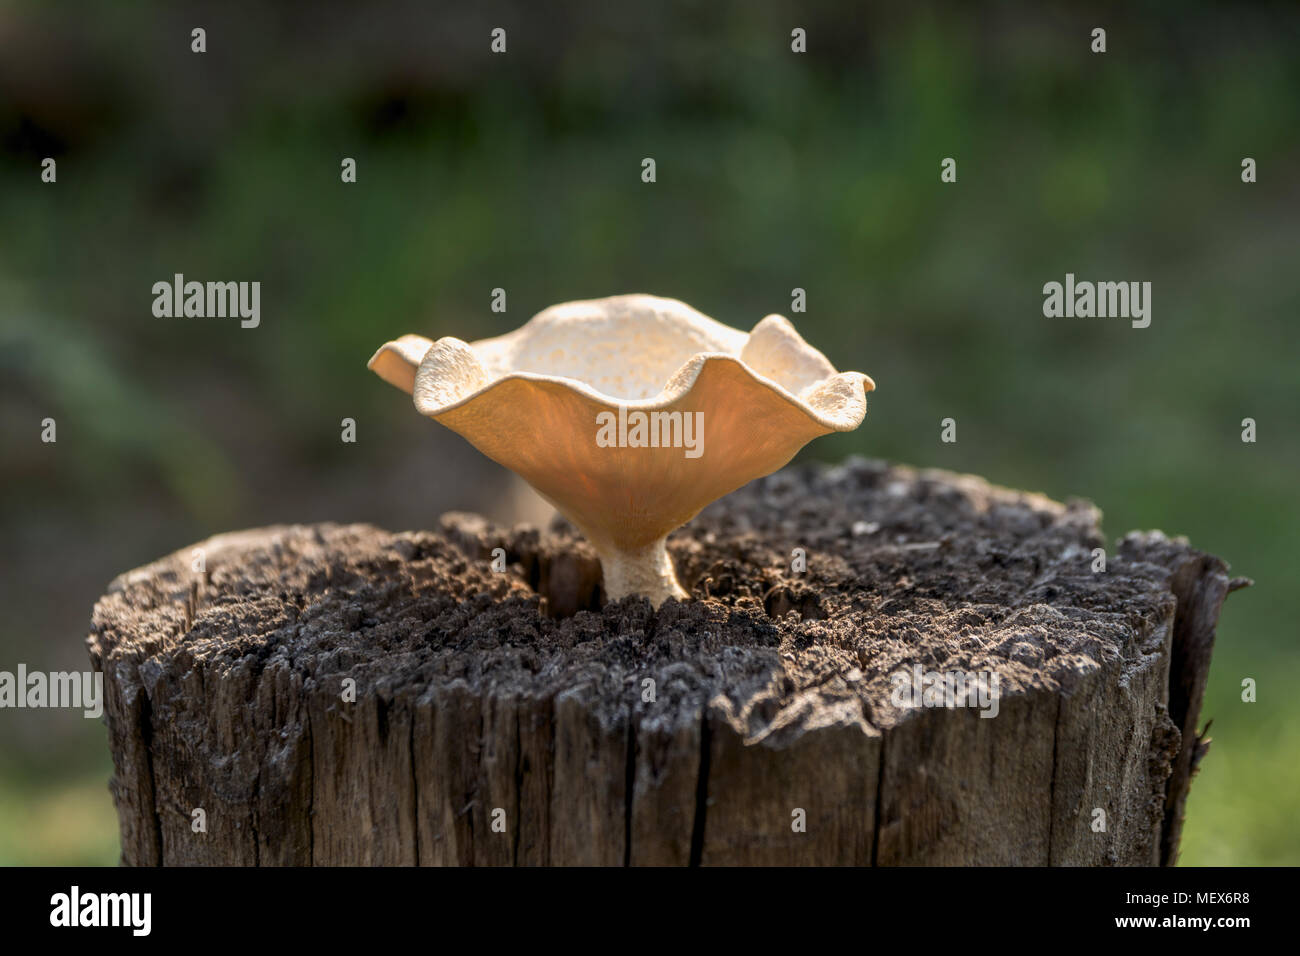 Macro mushroom on old and dead tree stump in the forest. Stock Photo